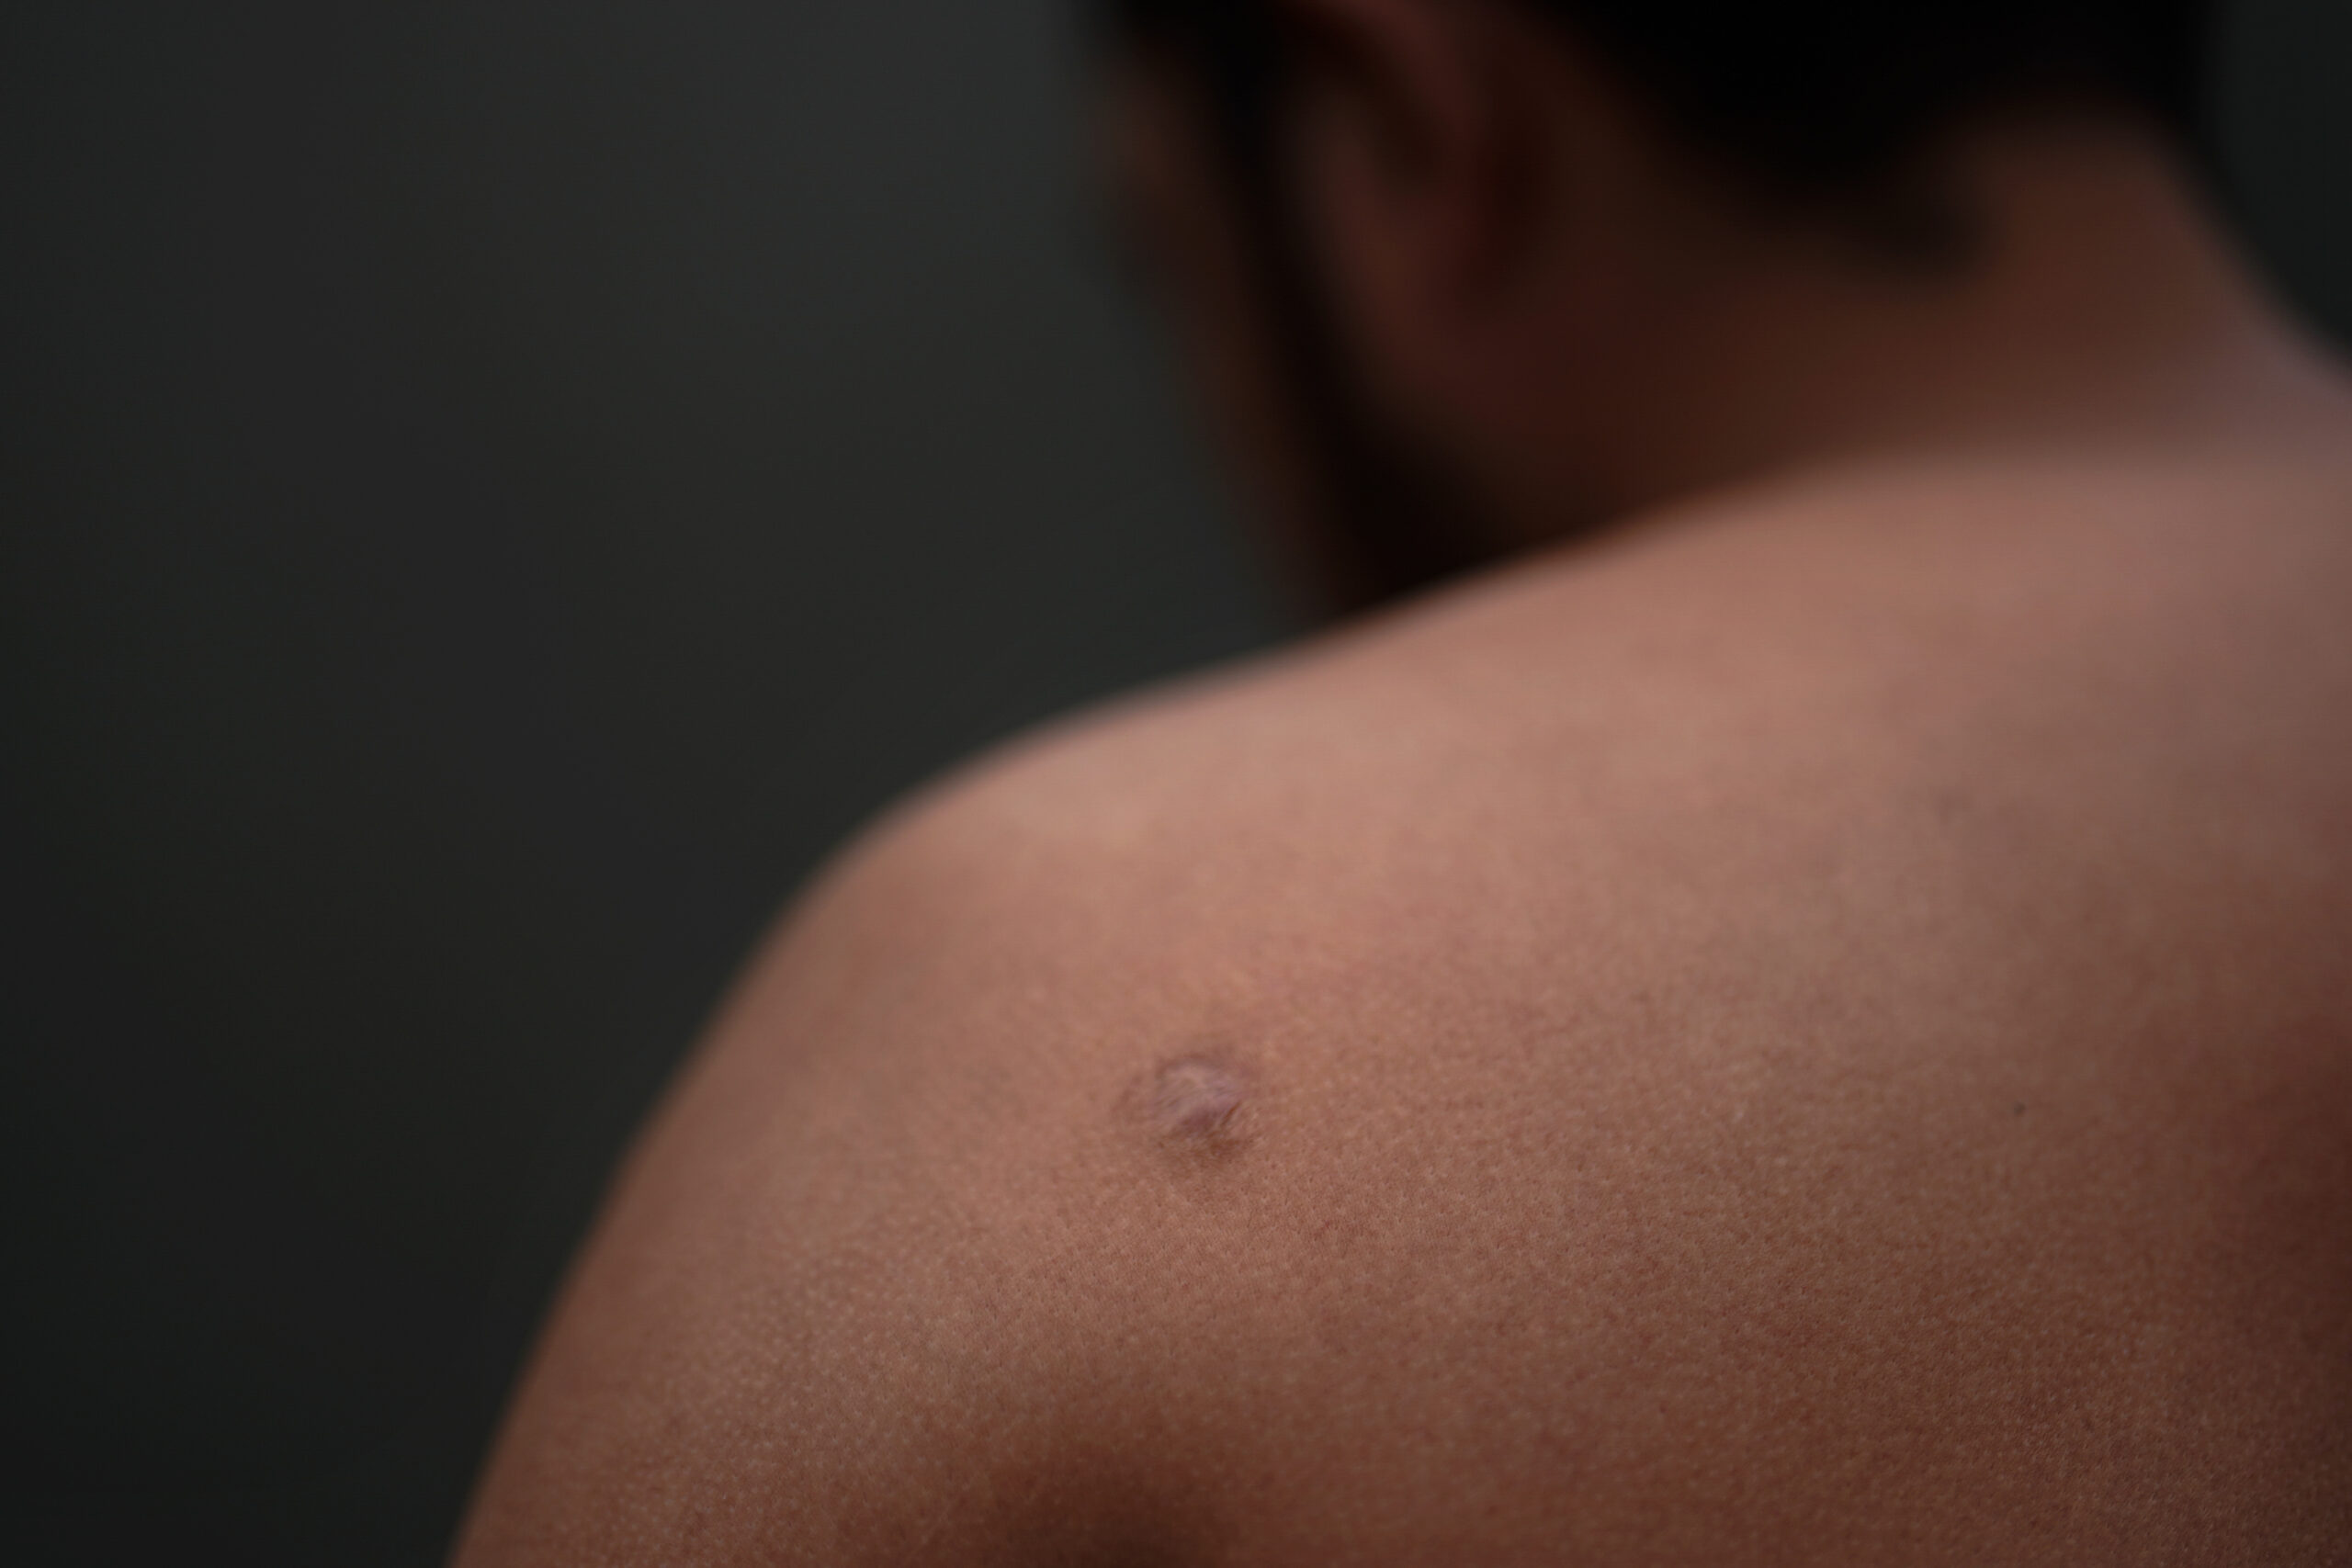 Asylum seeker Teodoso Vargas shows bullet wounds to his torso, after being shot nine times during a...